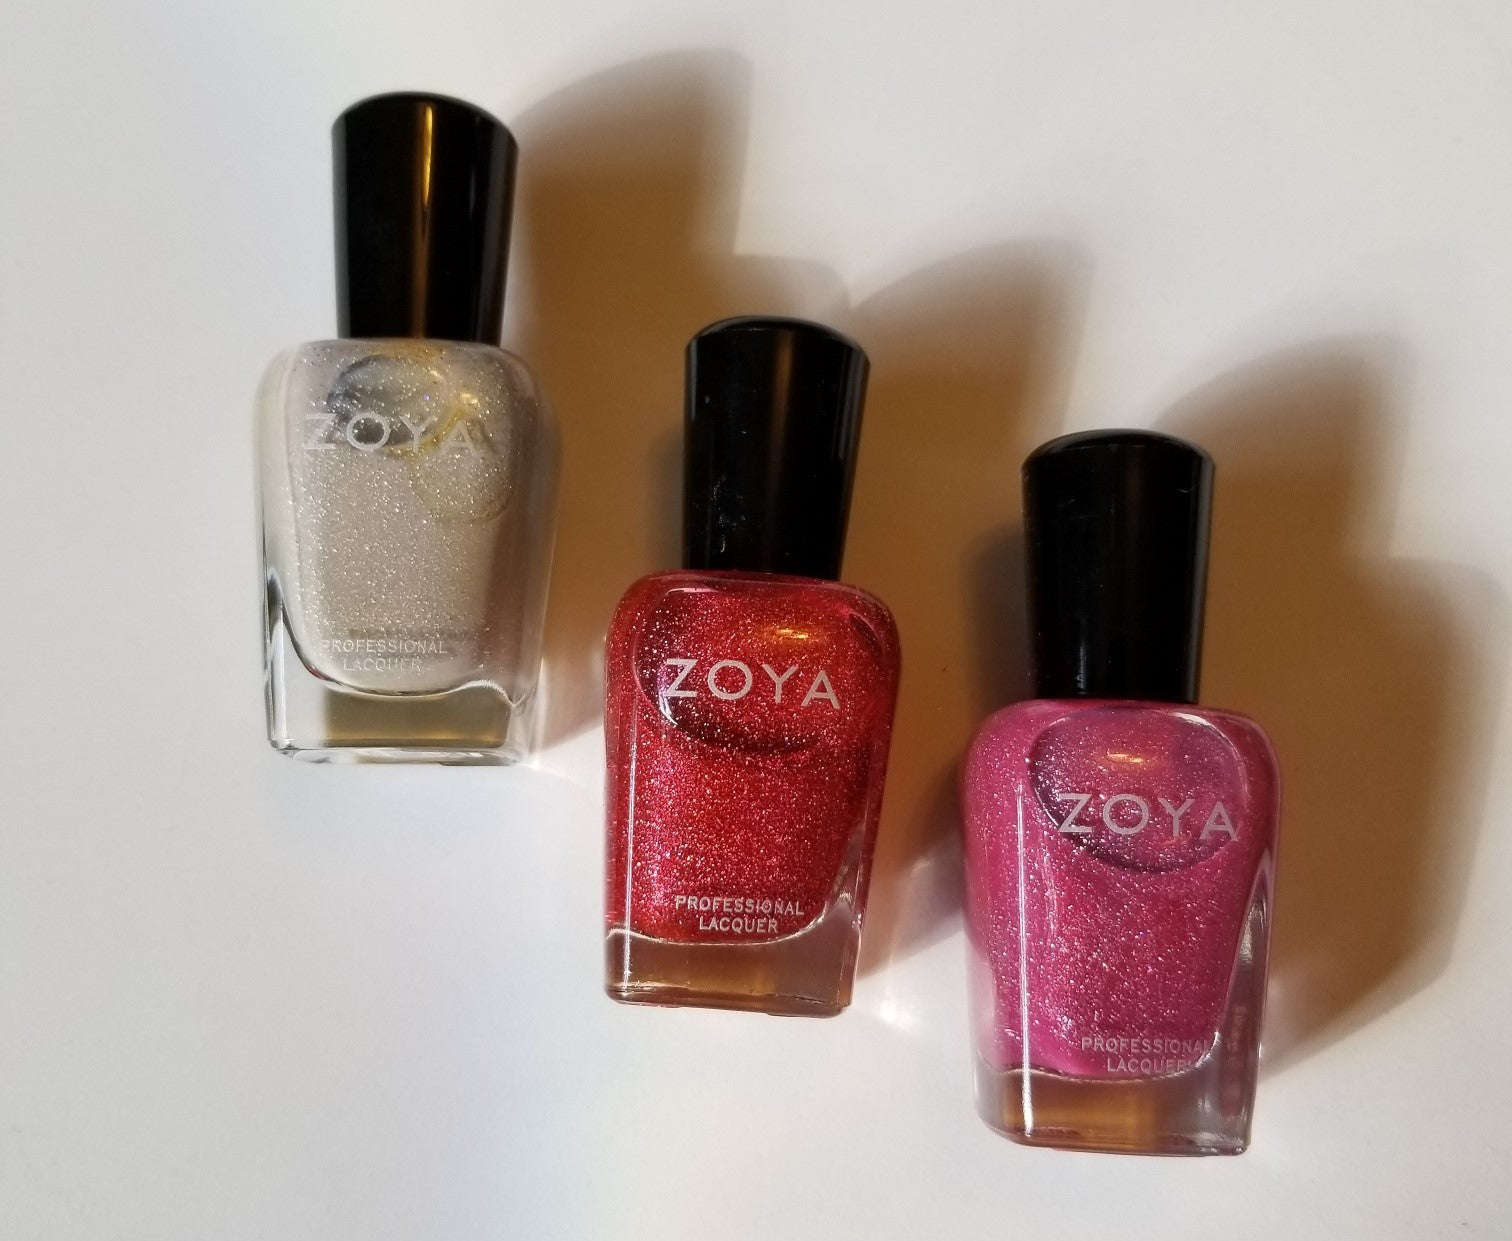 Review, Shades, Nail Polish Trends 2019, 2020: Zoya Nail Polish, How To Achieve Holographic Nails, The Winter Holos Collection, Cadence, Everly, Brighton